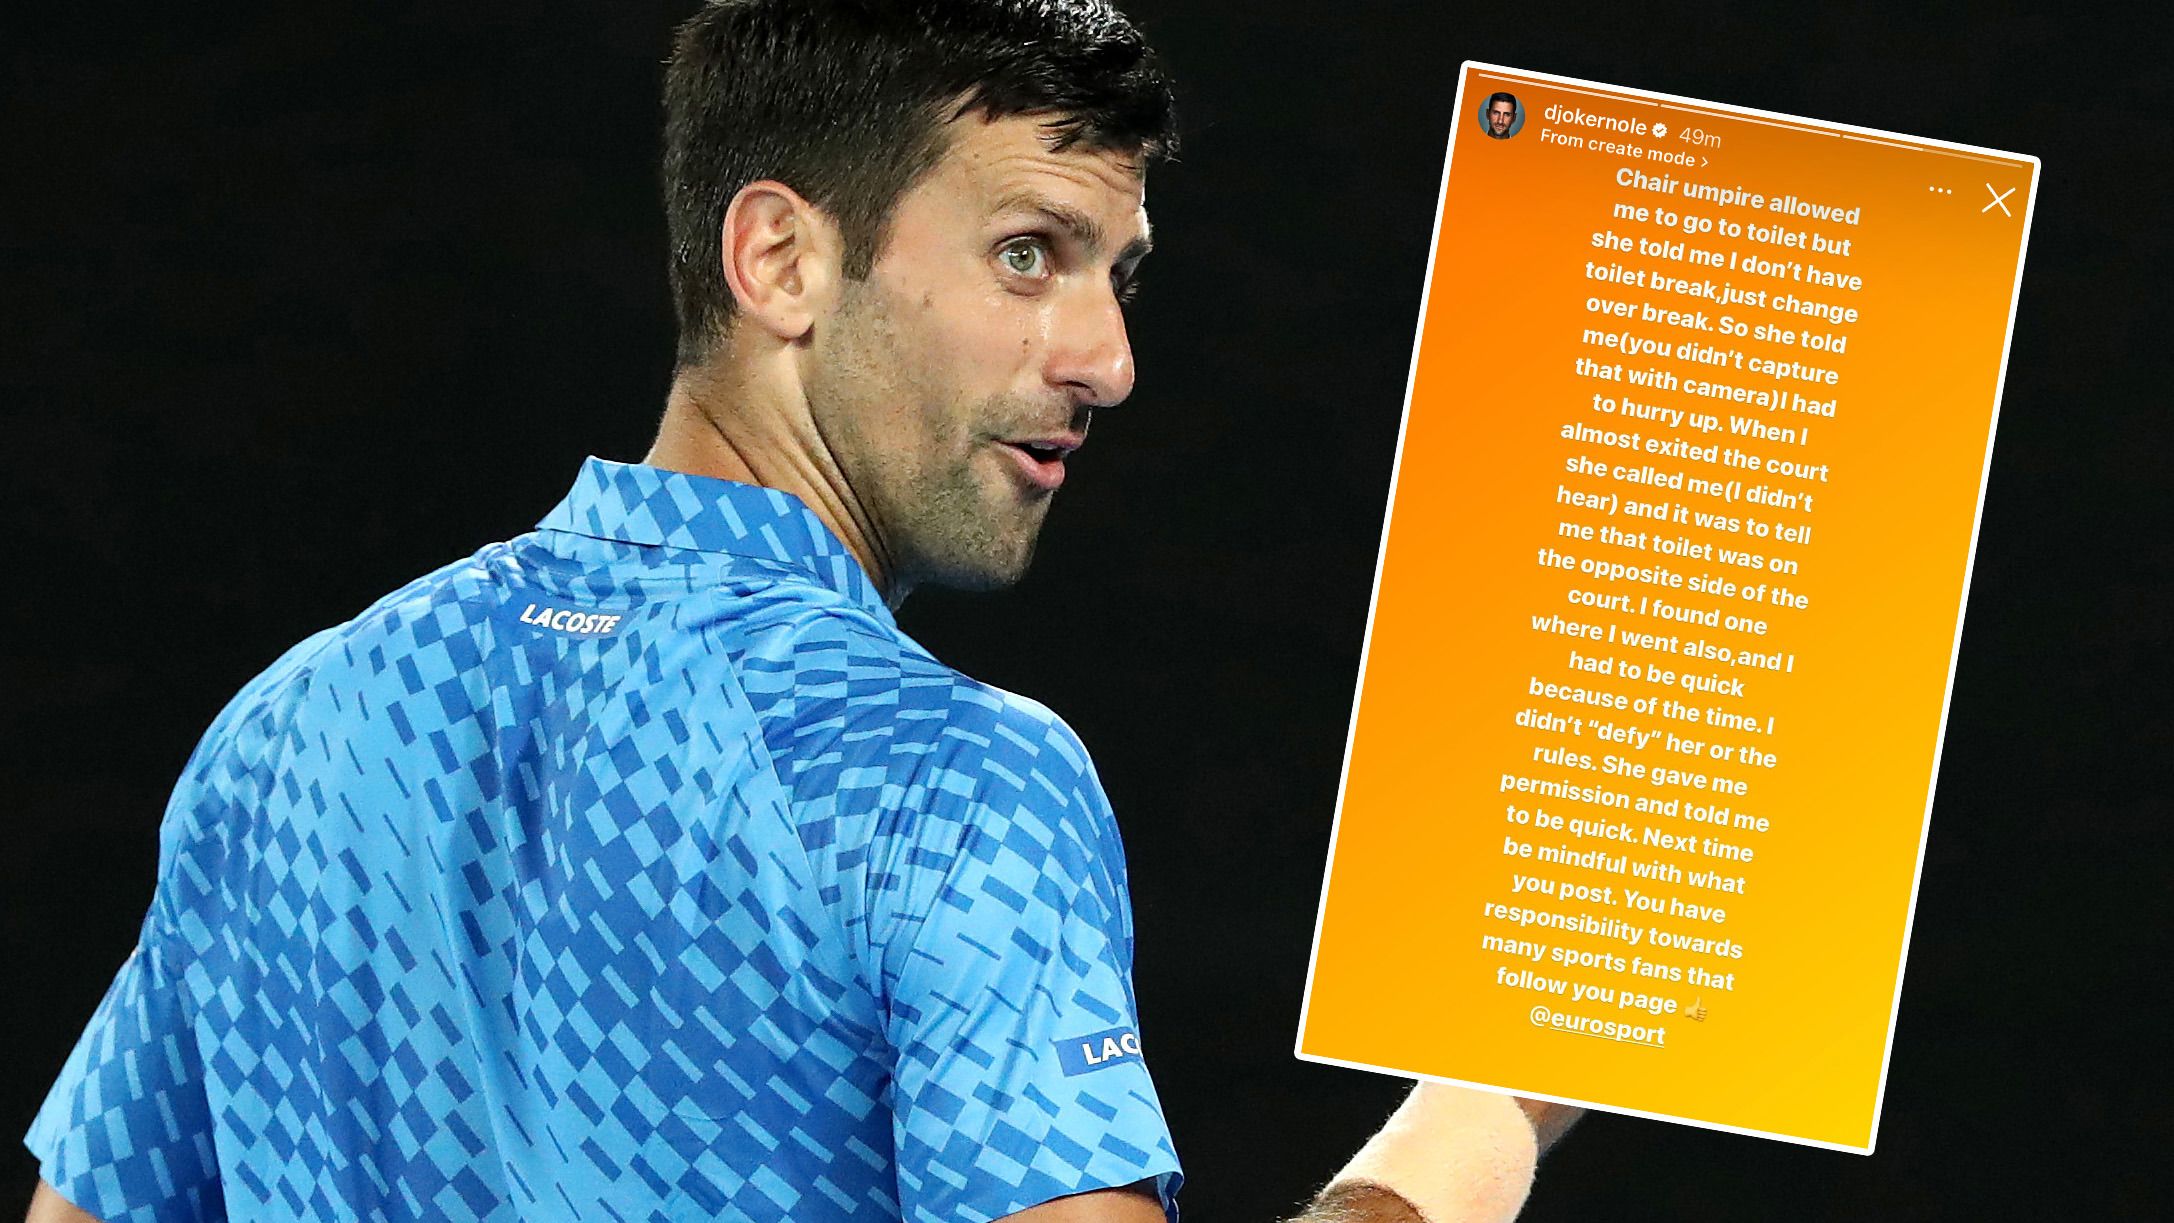 Novak Djokovic has hit back at allegations he defied an umpire to go on a toilet break.